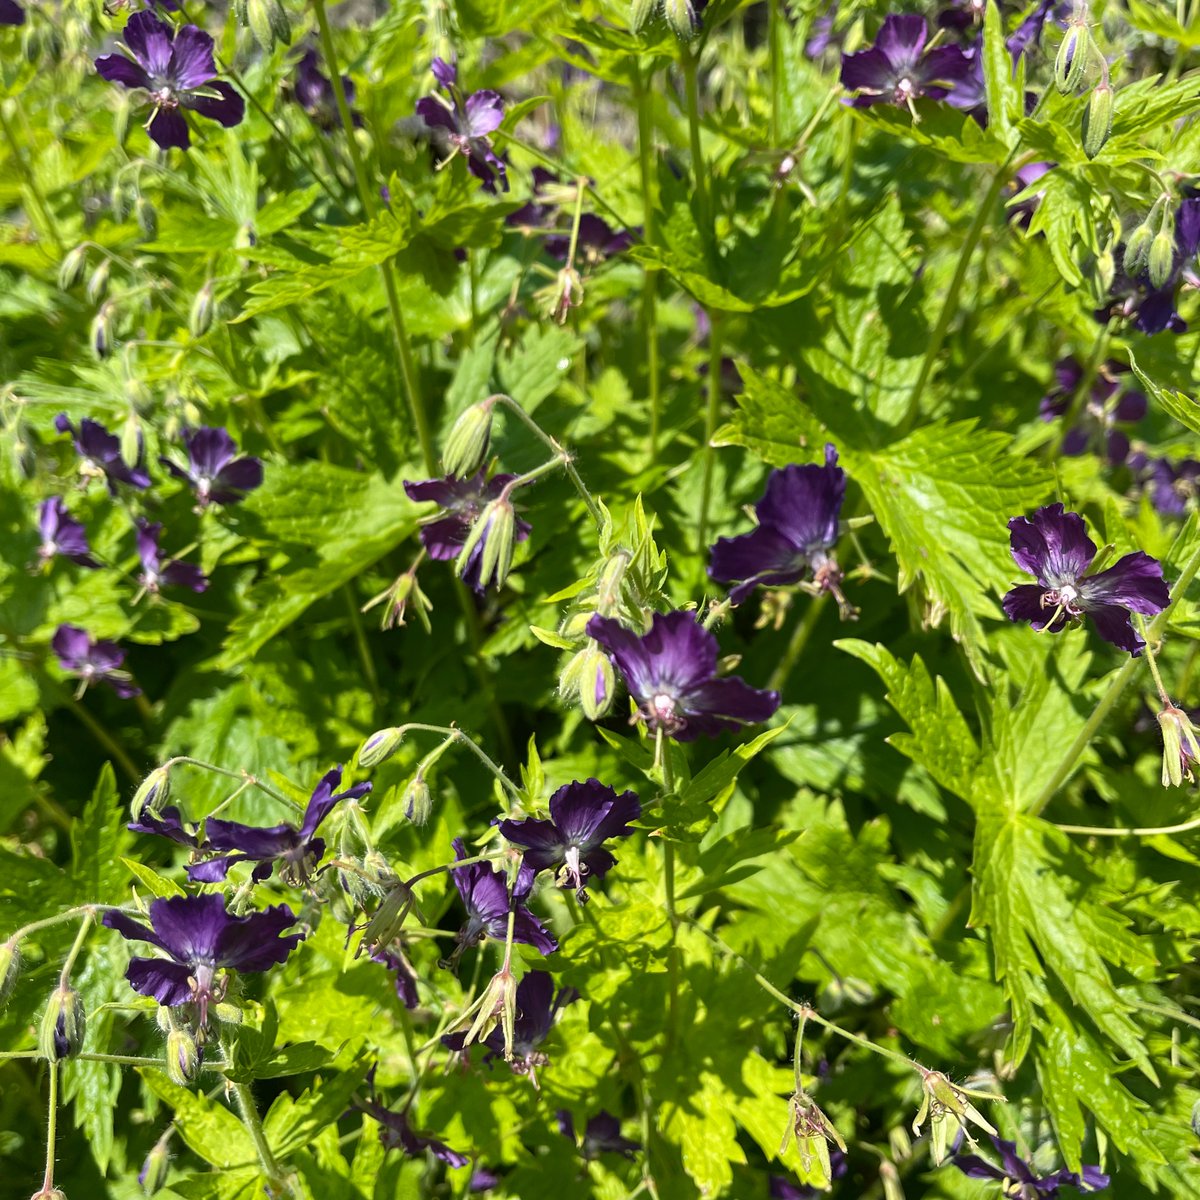 A particularly good year for Geranium phaeum I’d say.  Good size & flower production.  Also, being cooler, flowers have lasted longer than they might otherwise. Never liked the common name Mourning Widow - depressing. I see them as more sultry & stylish. #geranium #geraniumphaeum